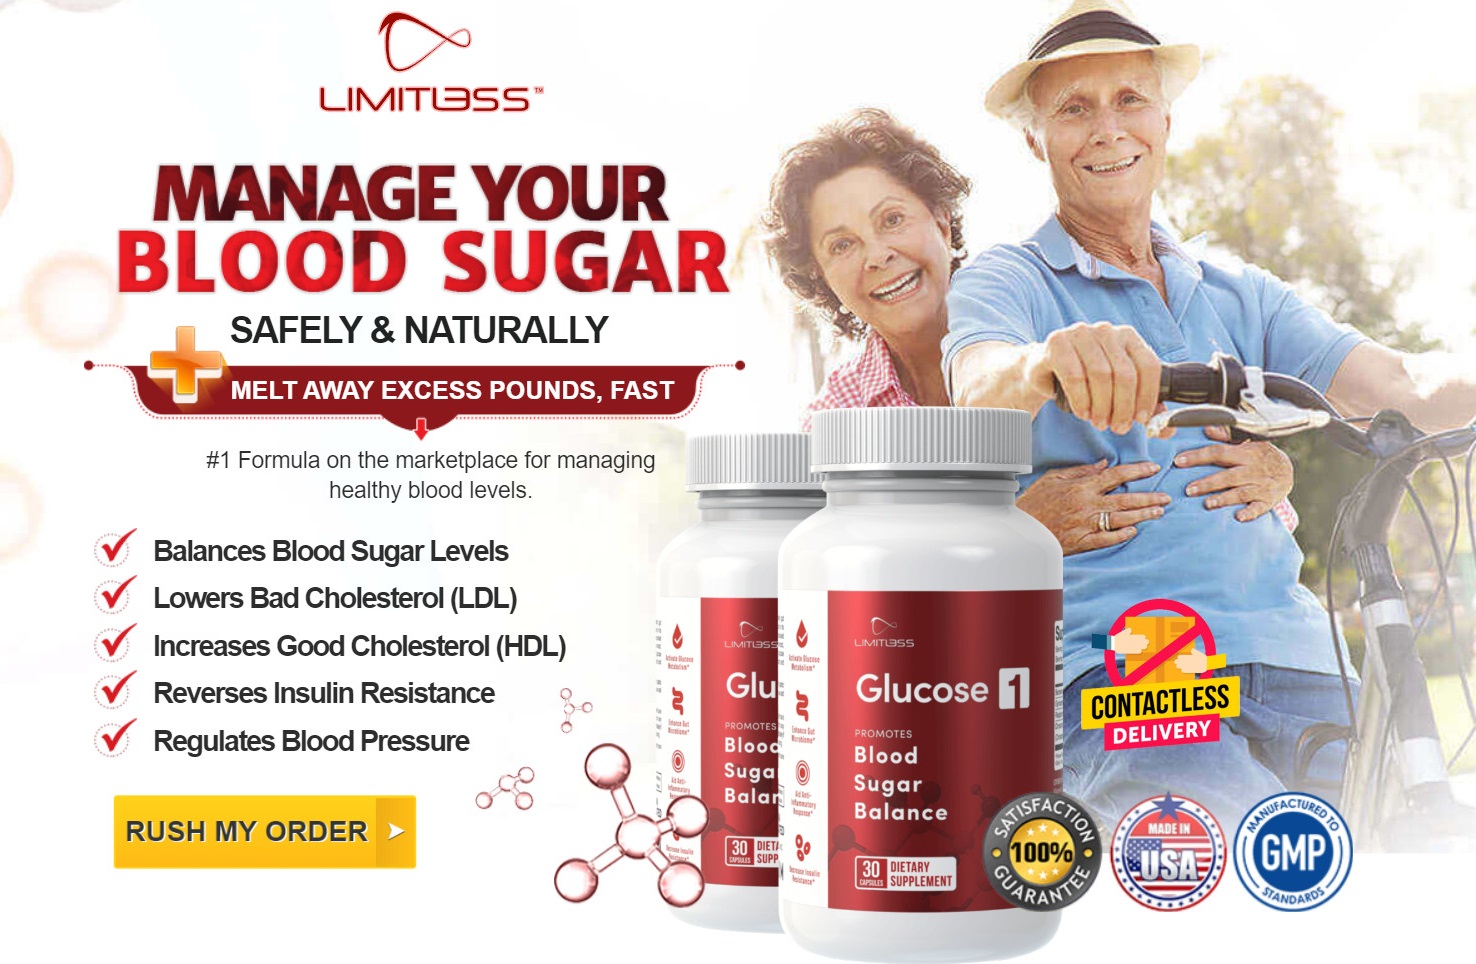 Limitless Glucose1 order now